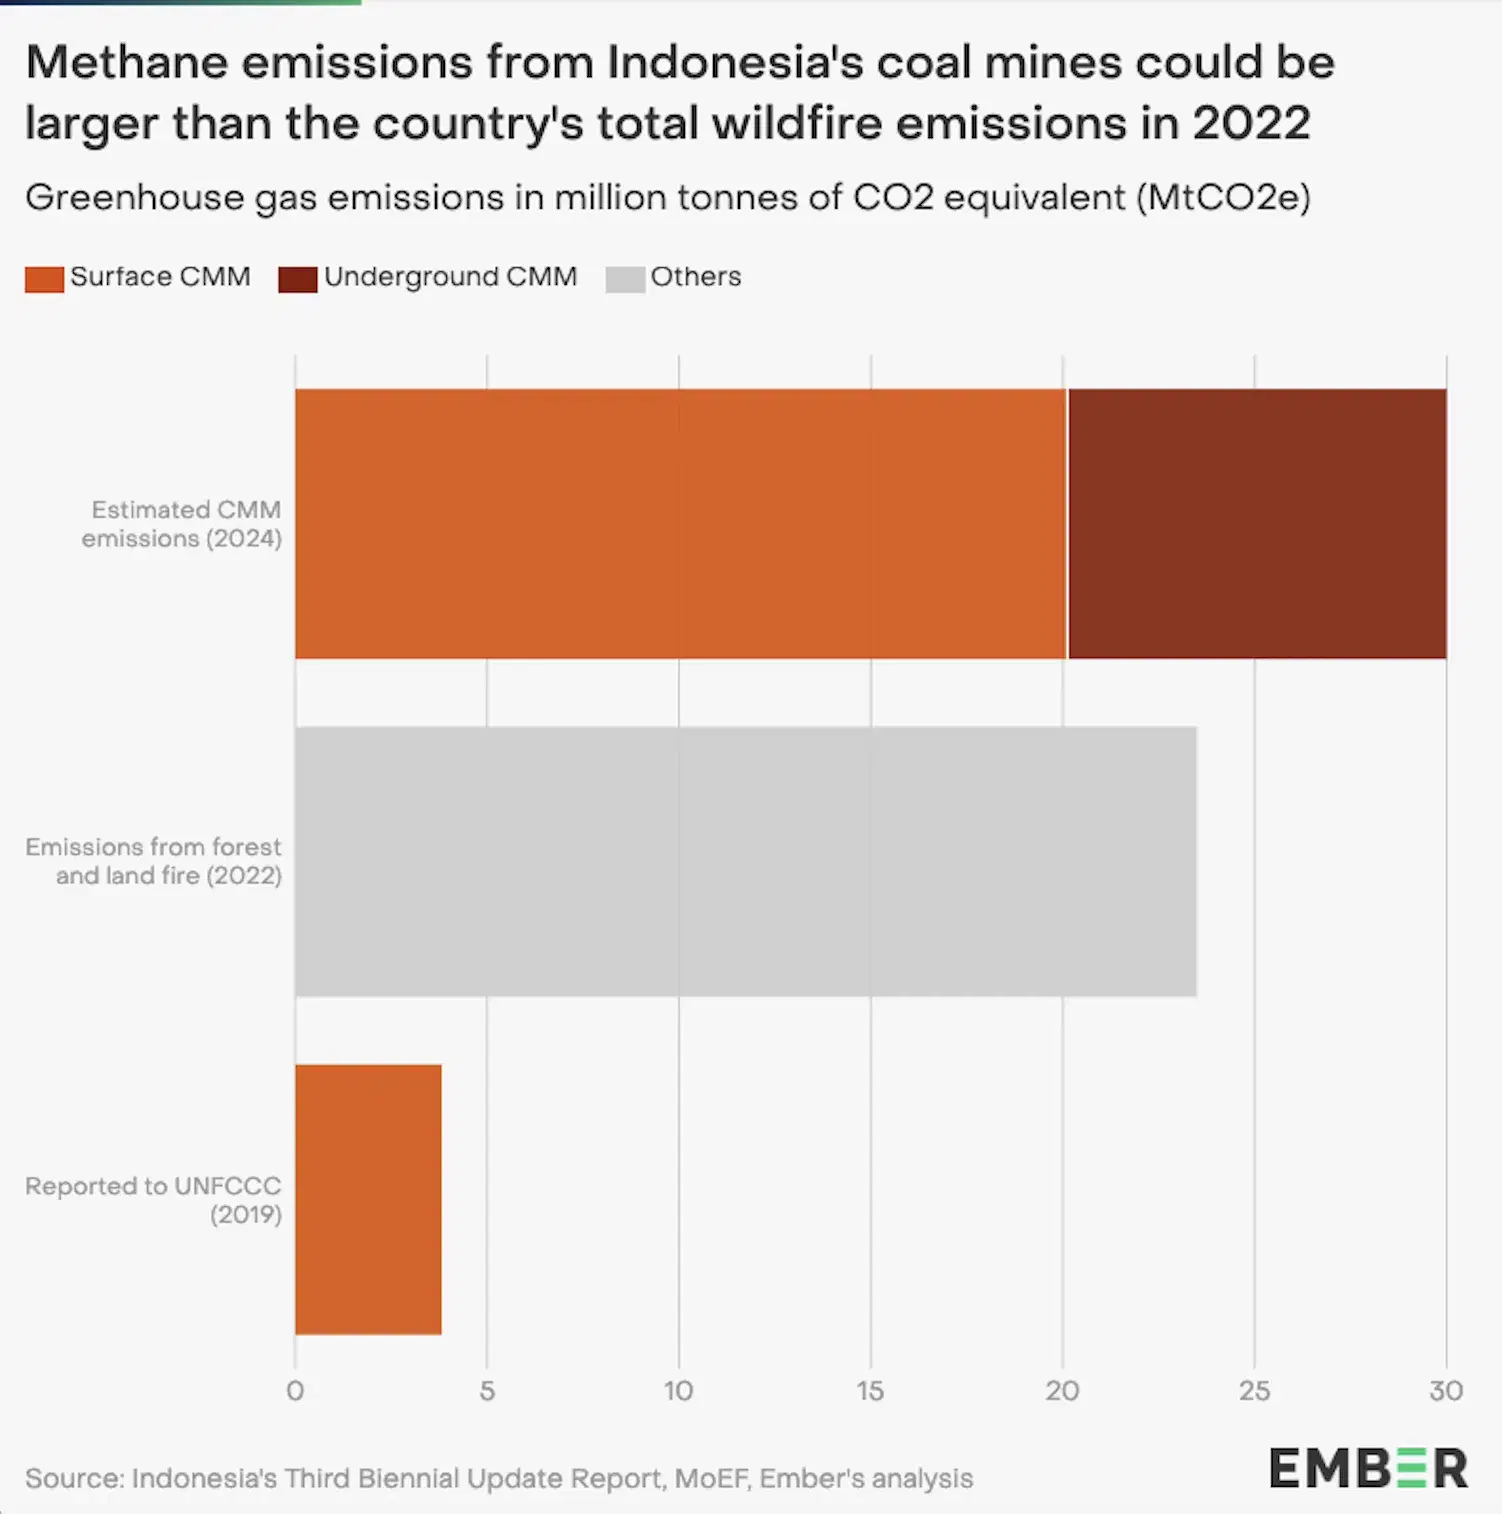 Charting Methane Emissions from Indonesia's Coal Mines